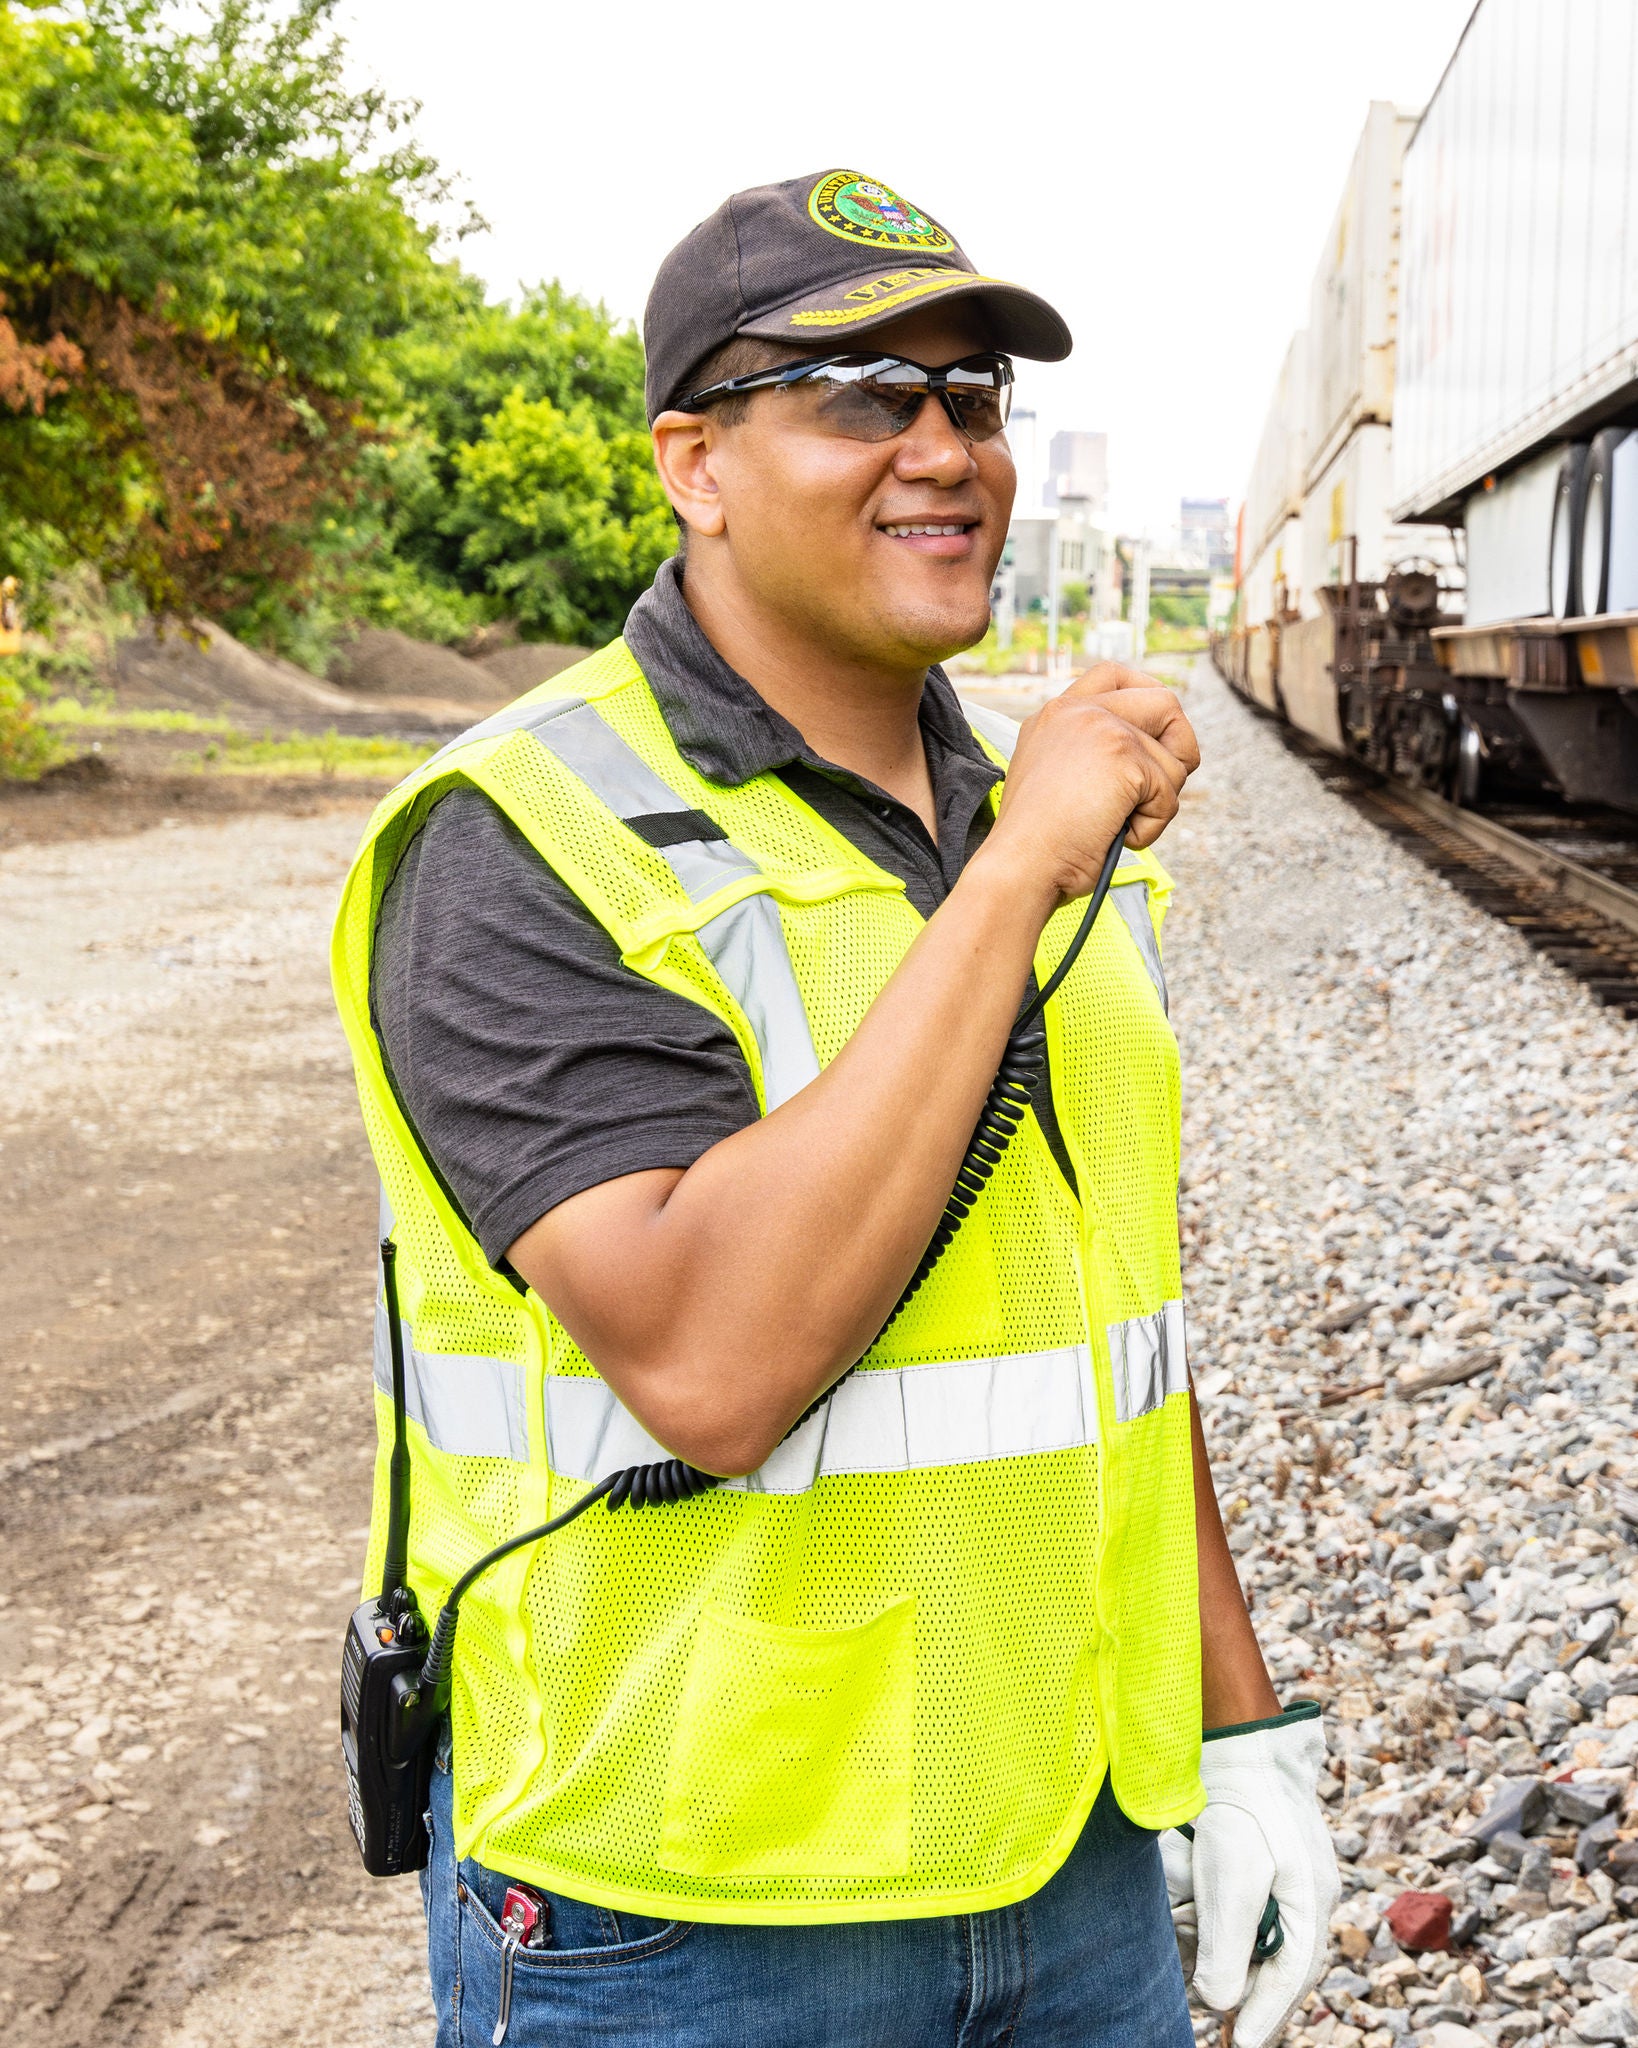 norfolk southern craft employee in railway job and dispatcher job wearing yellow vest and sunglasses using handheld transceiver